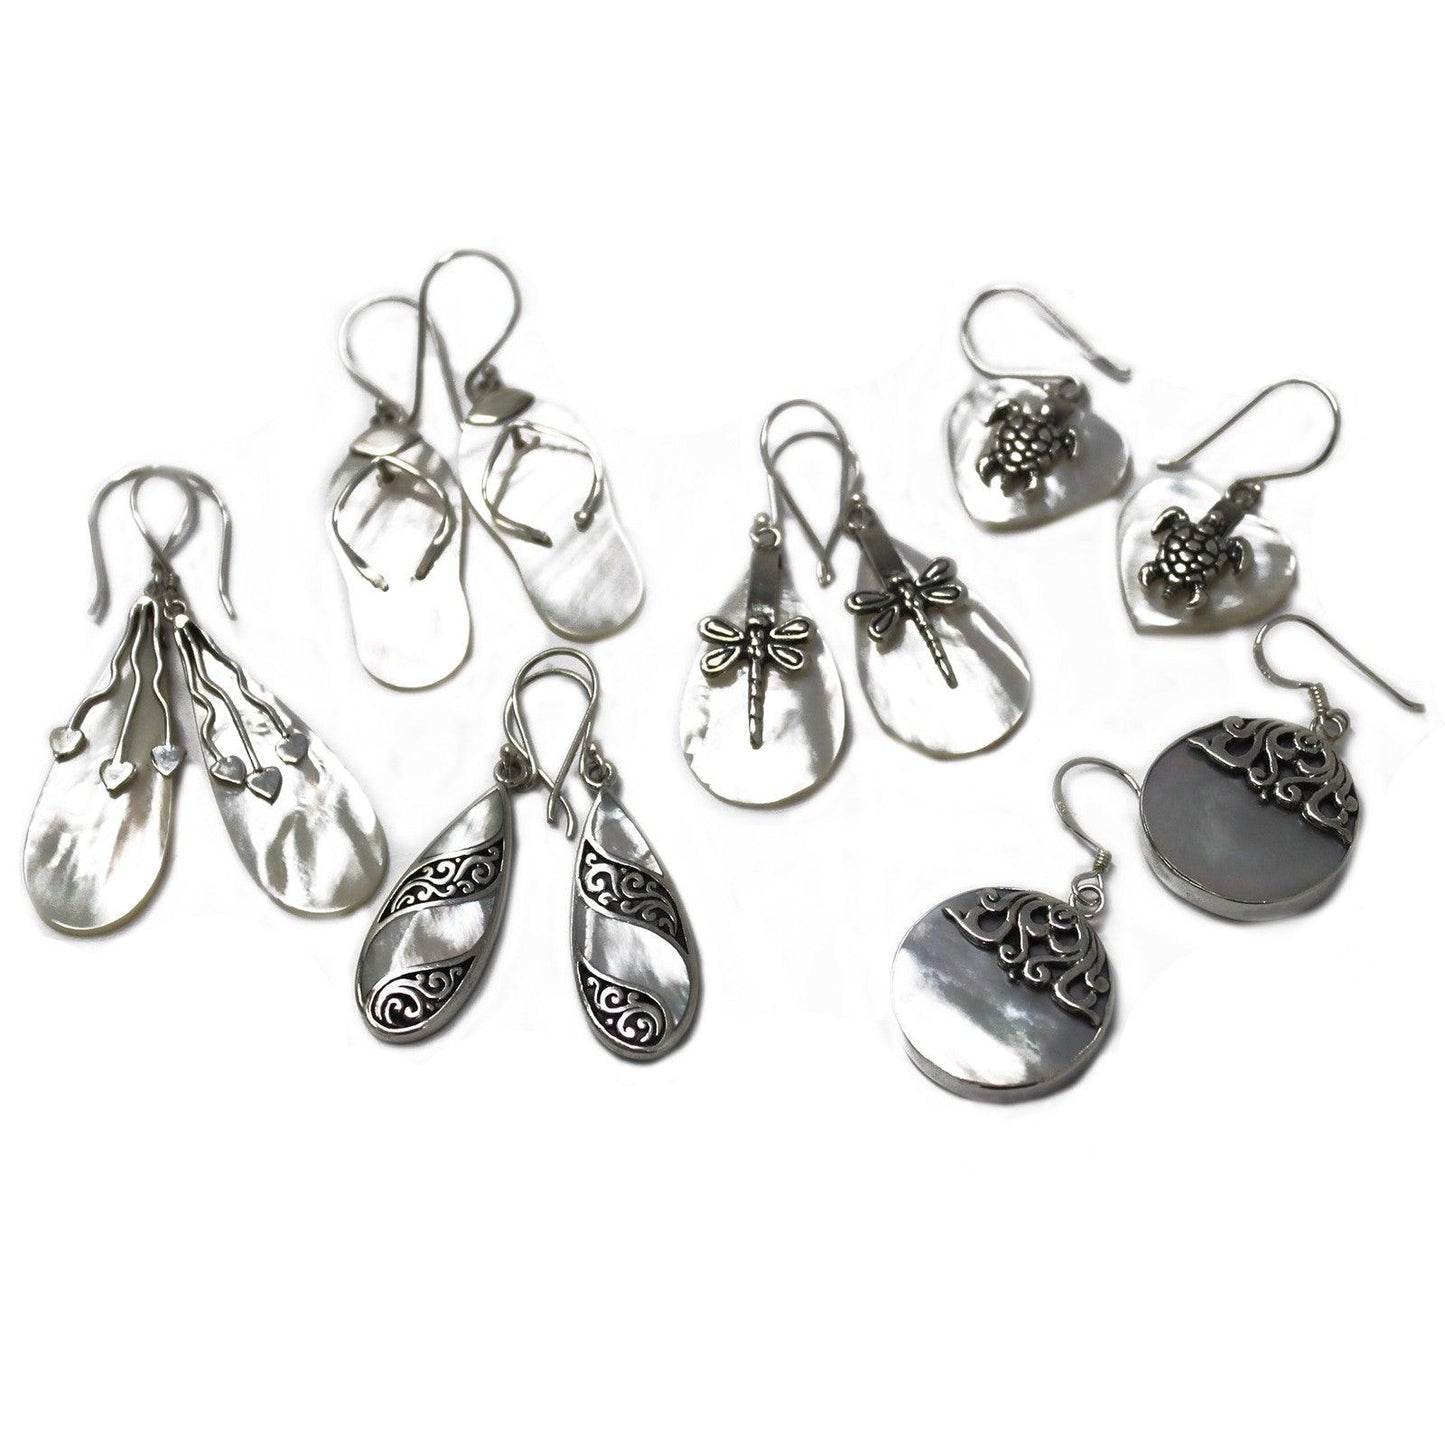 Shell & Silver Earrings - Dragonflies - MOP - DuvetDay.co.uk